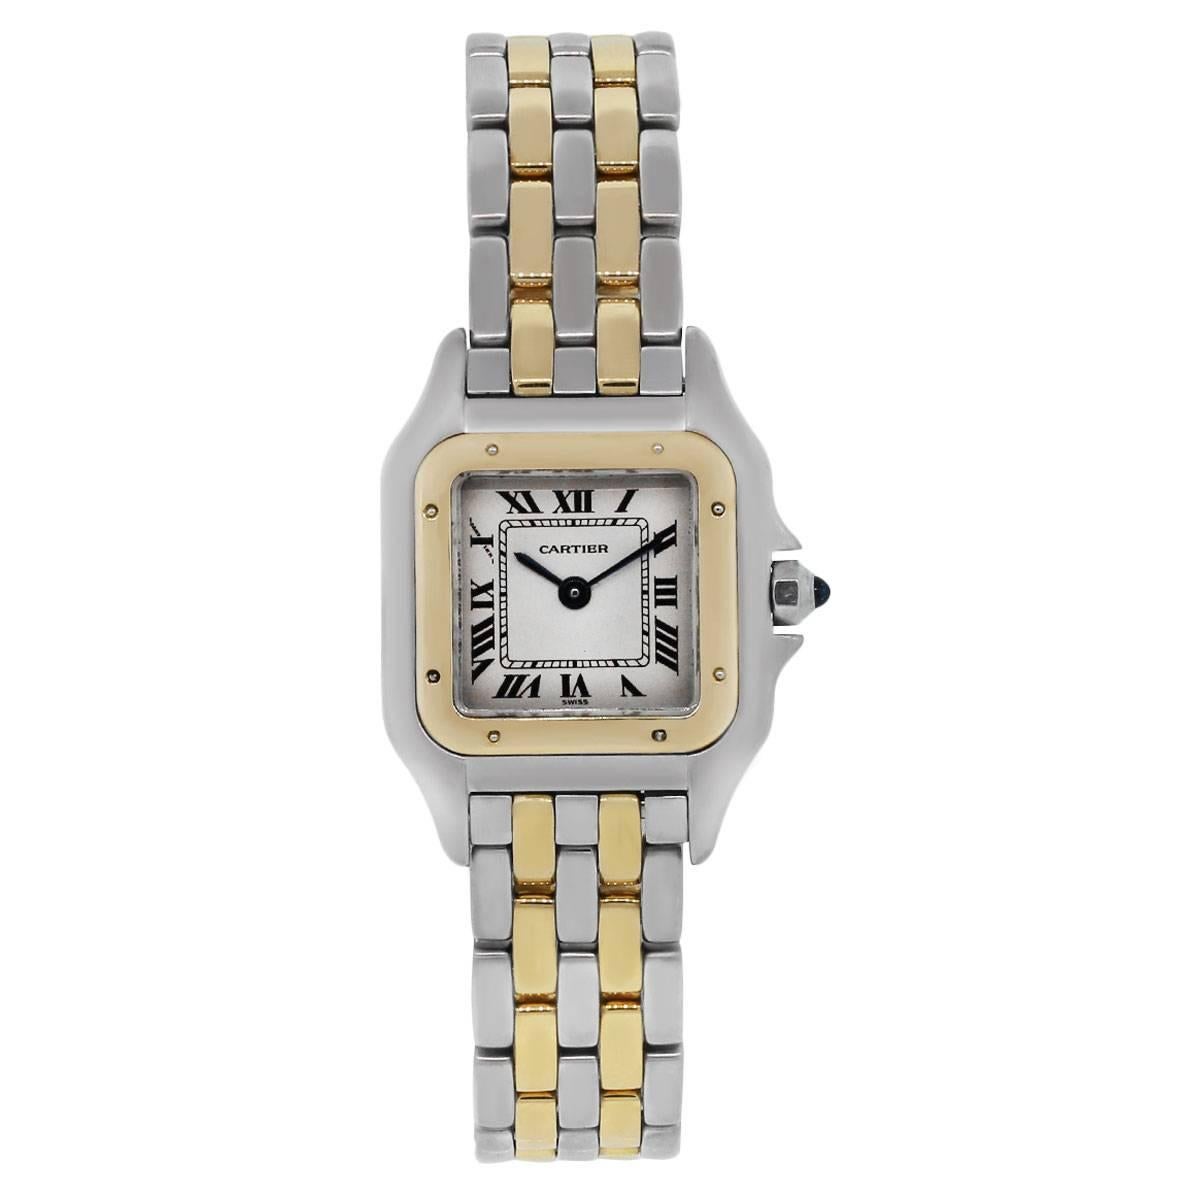 Brand: Cartier
MPN: 1120
Model: Panthere
Case Material: 18k yellow gold and stainless steel
Case Diameter: 22mm
Crystal: Scratch resistant sapphire
Bezel: Fixed yellow gold bezel
Dial: Champagne dial with Roman Numeral hour markers and blue